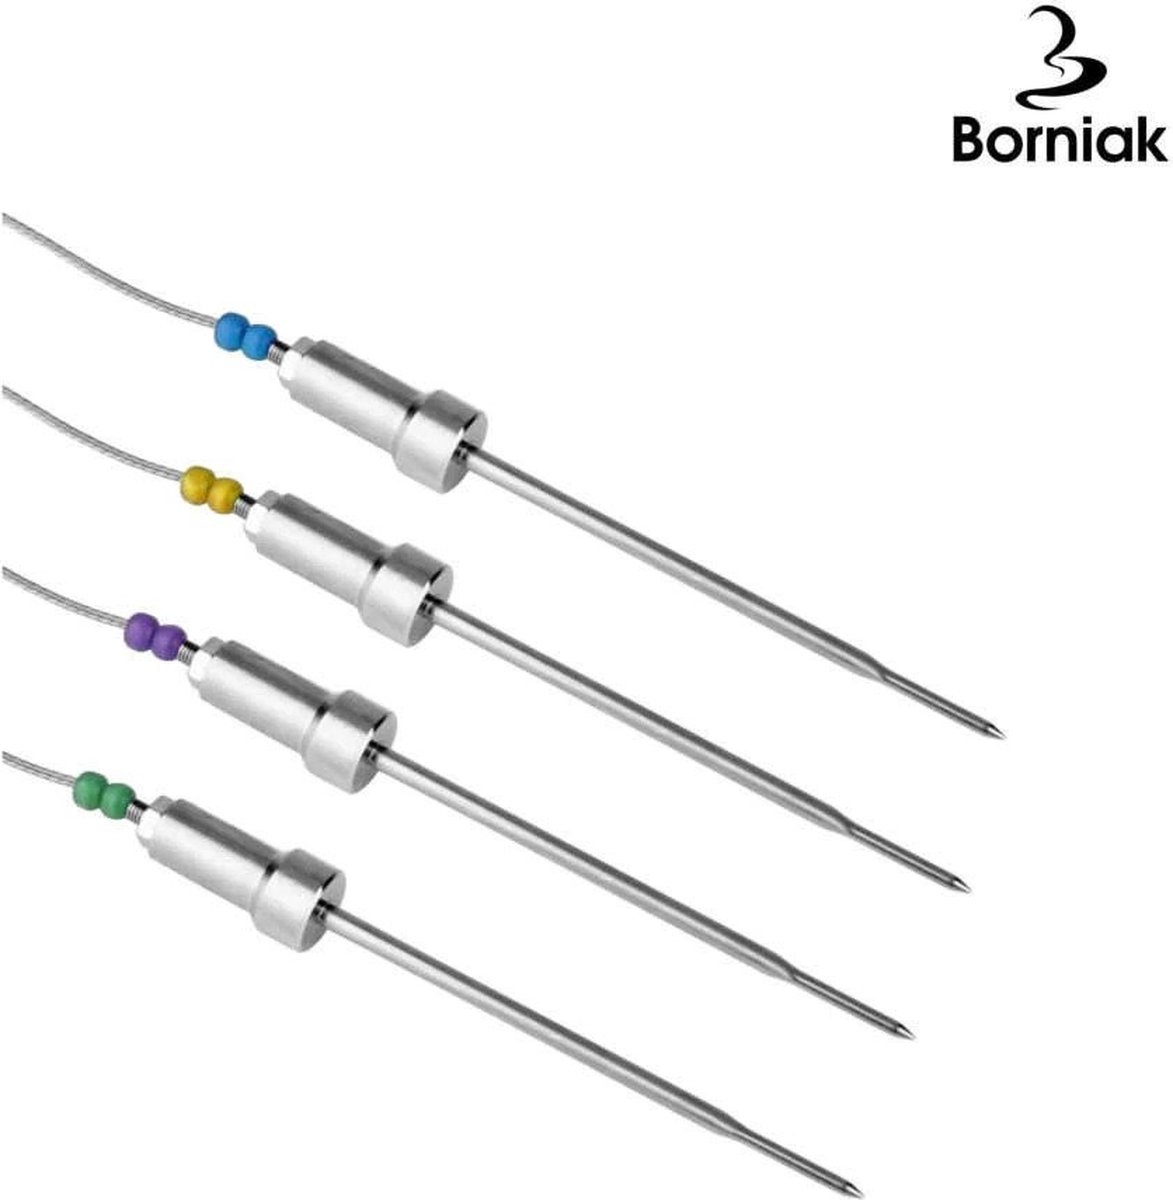 Probes for Bluetooth Thermometer 4 pcs